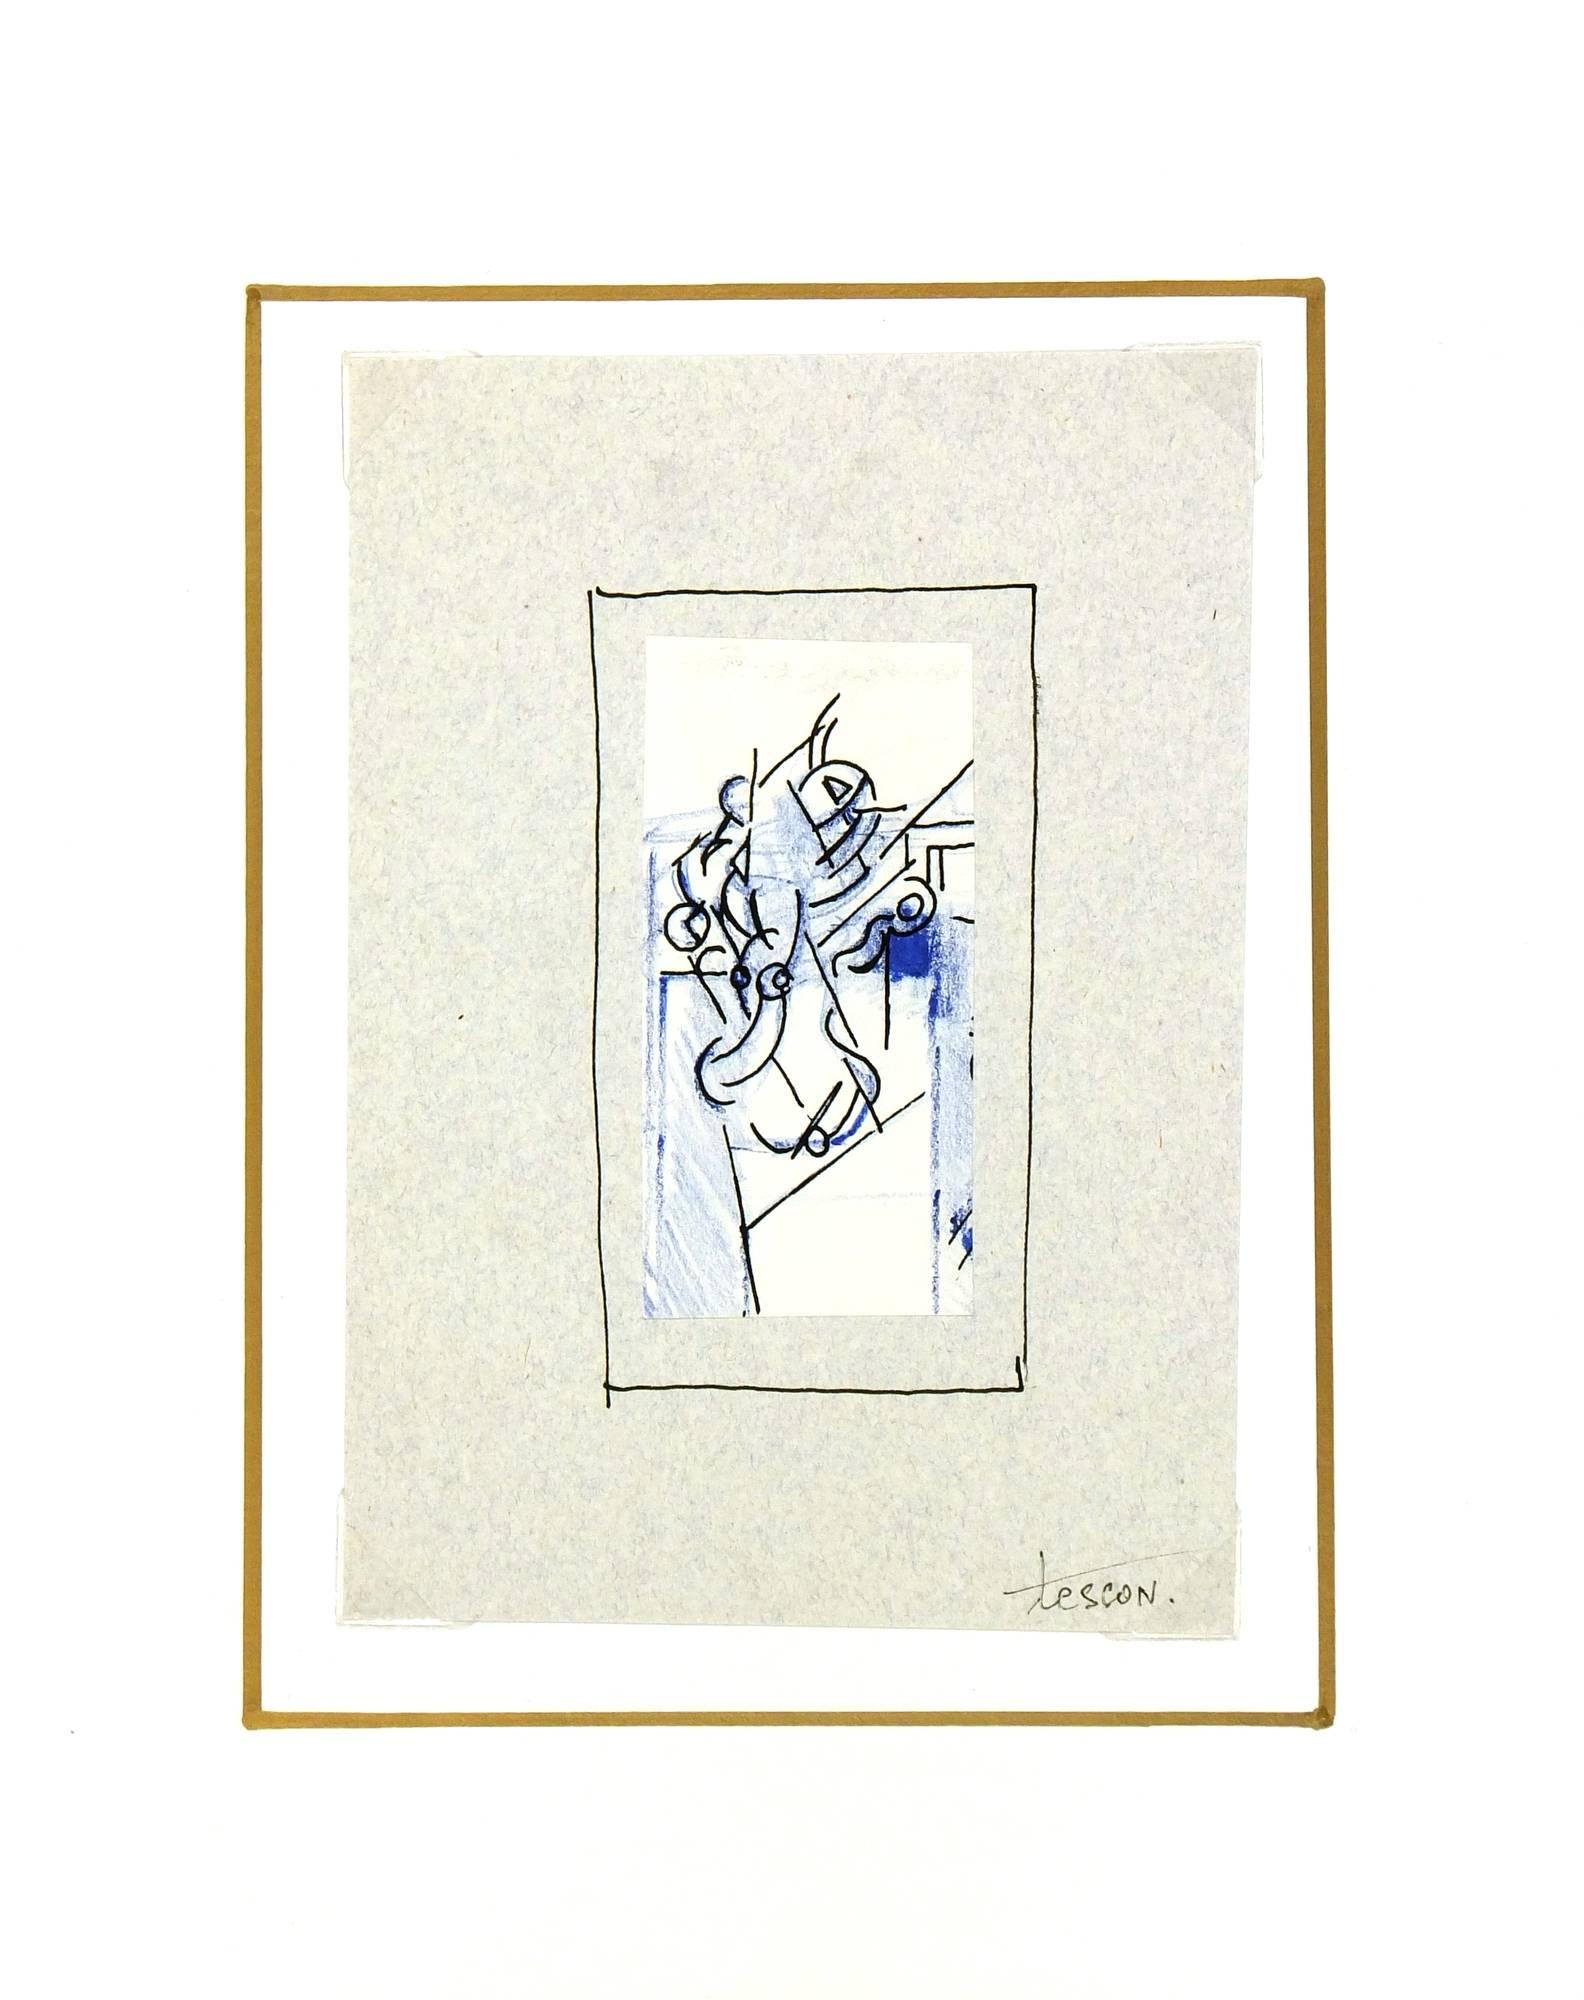 Abstract modern in ink with blue highlights by French artist Tesson, circa 1970.  Signed lower right.     

Original artwork on paper displayed on a white mat with a gold border. Mat fits a standard-size frame.  Archival plastic sleeve and